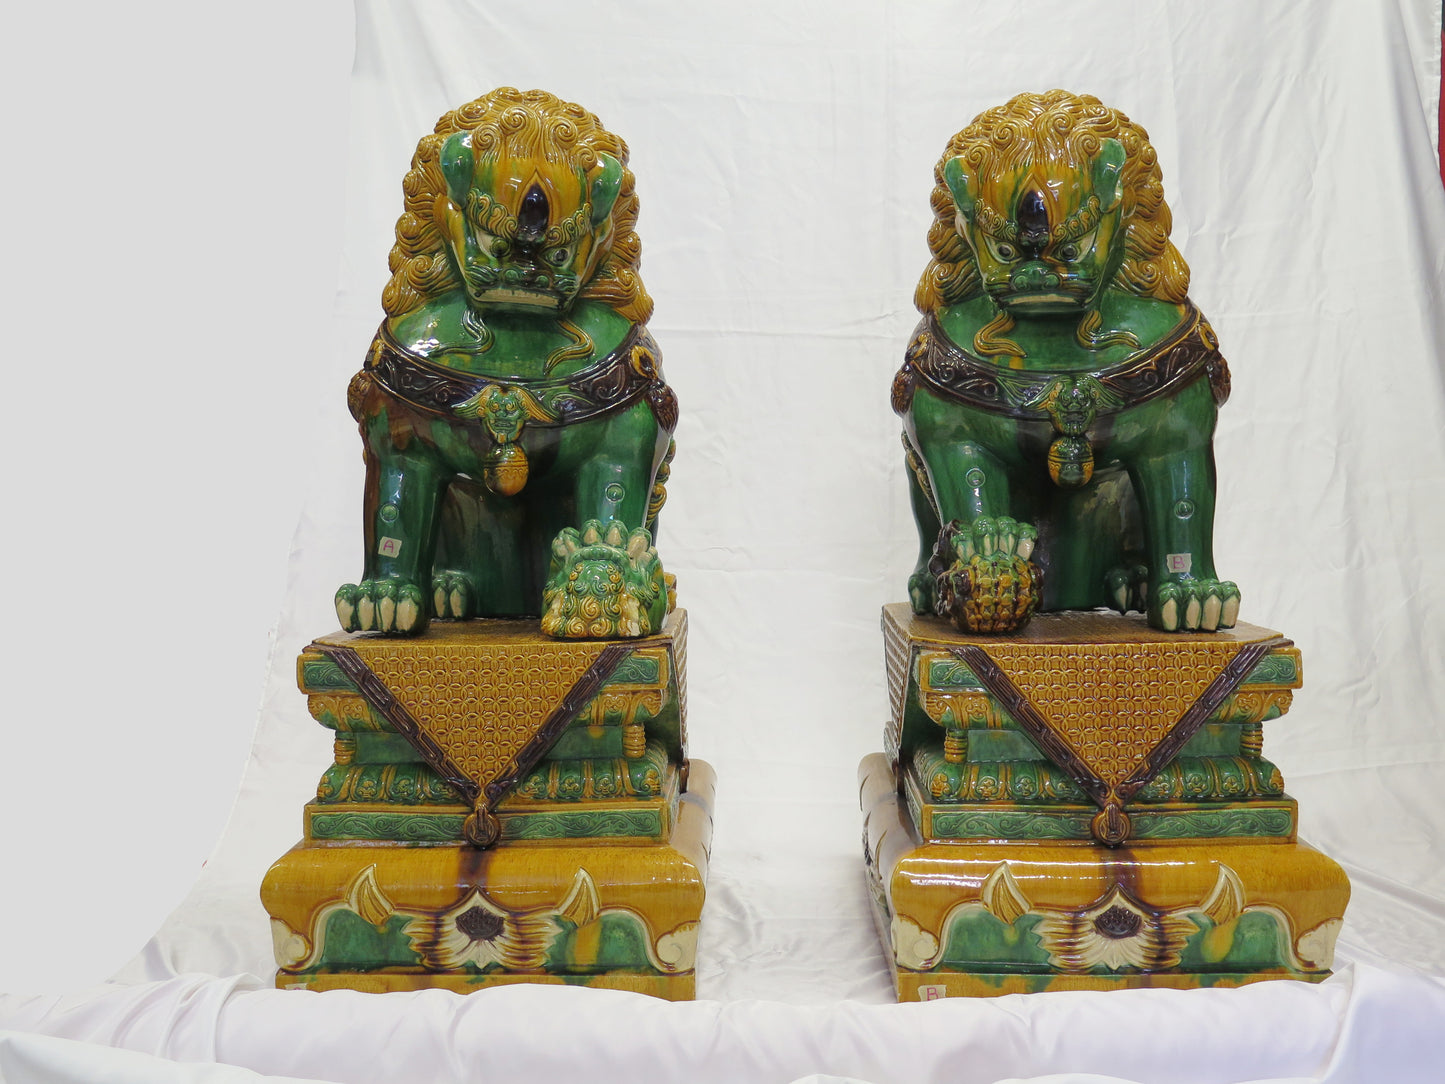 Two large ceramic foo dogs 88cm tall vintage Chinese ceramic hand painted Shishi China Chinese guard lions large glazed ceramic